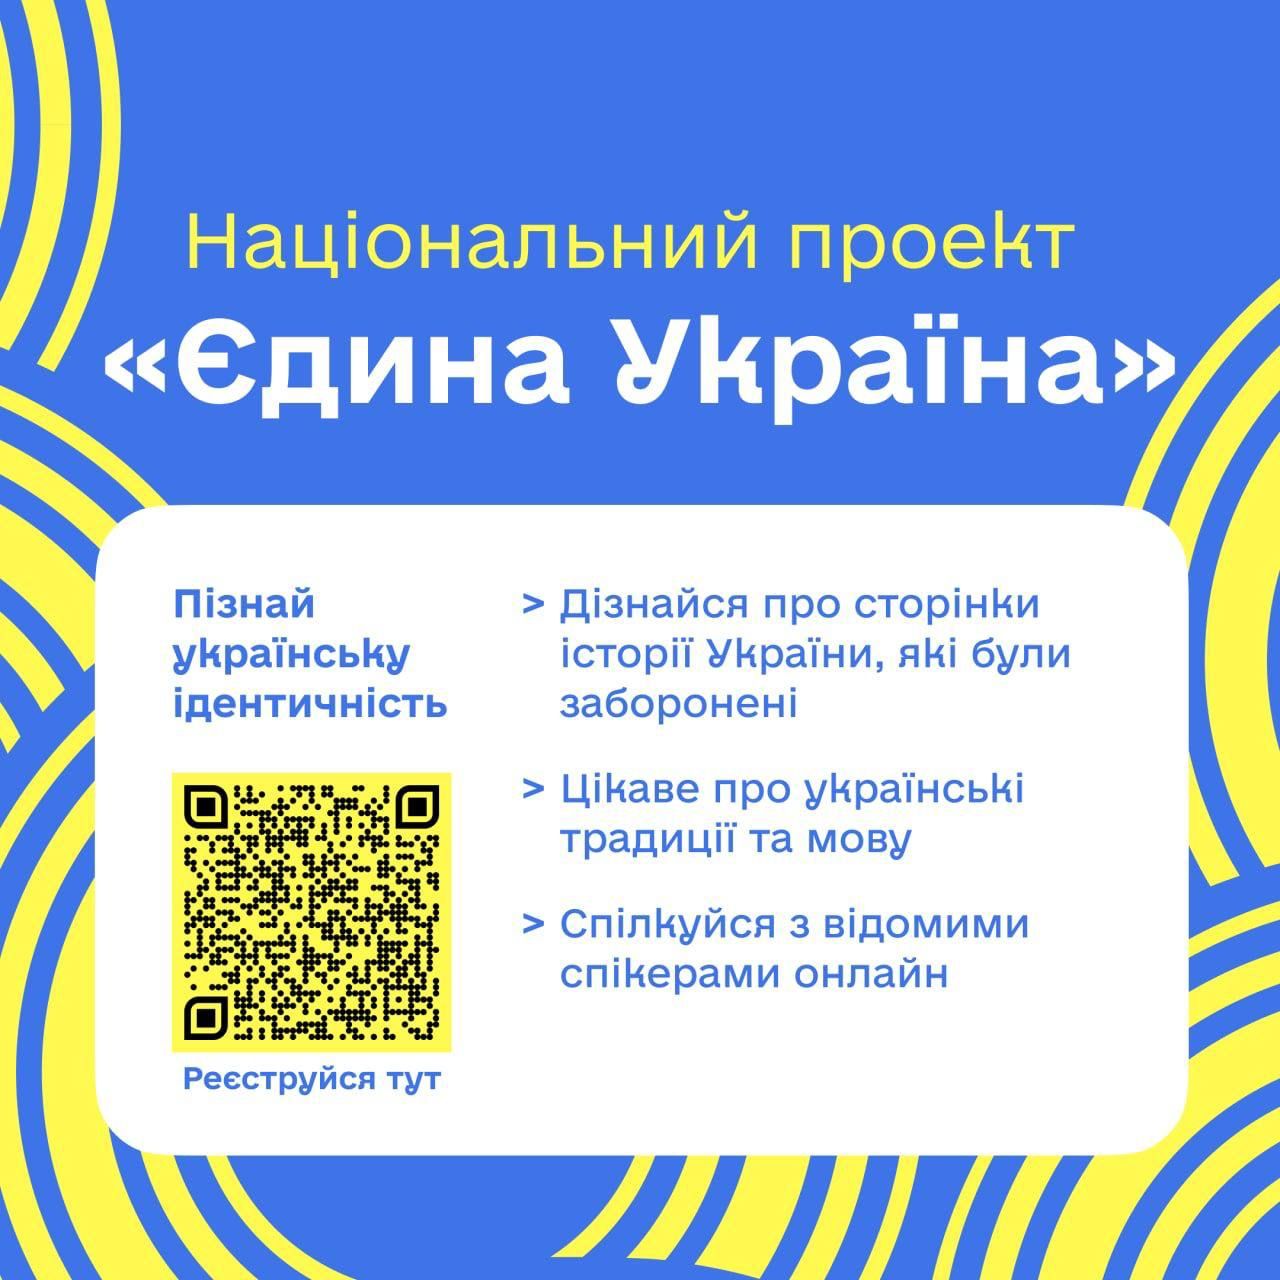 Lecture for the National Online Project “United Ukraine”